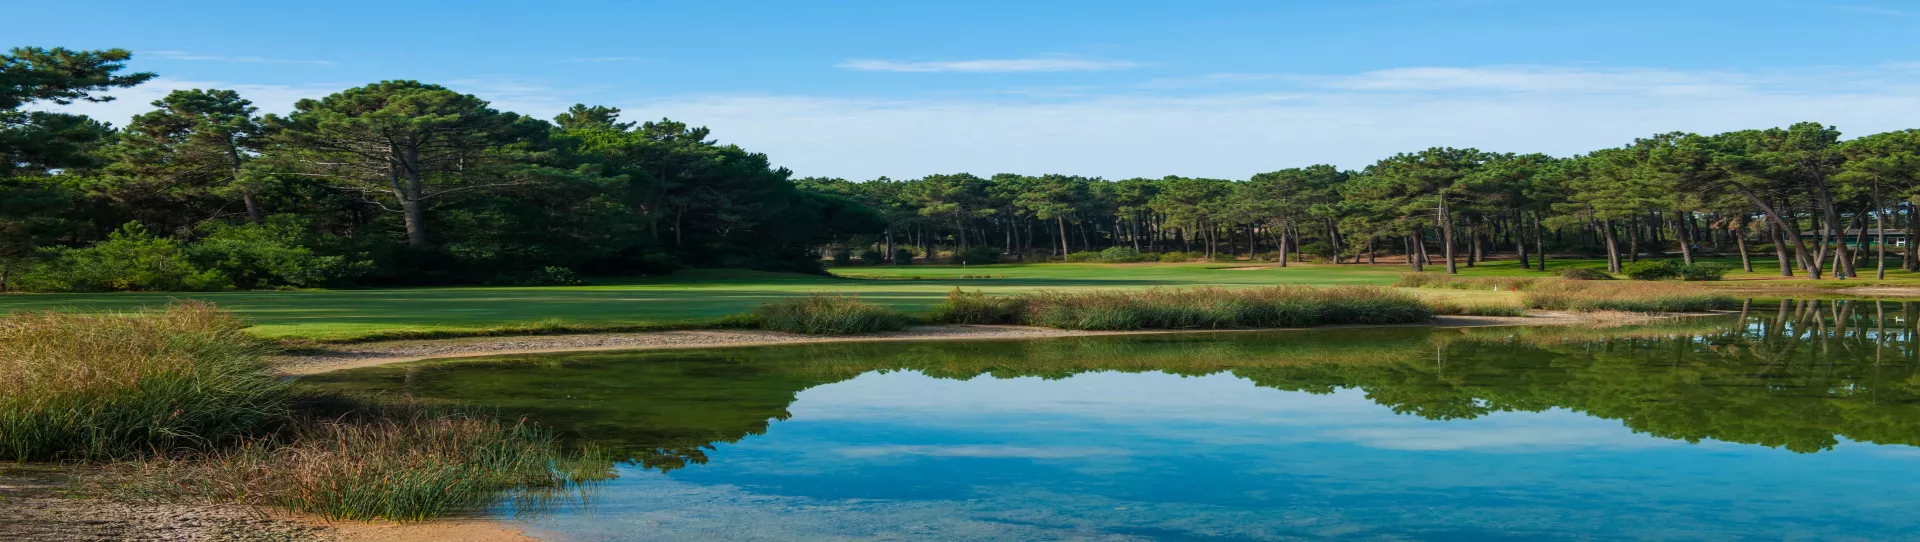 Portugal golf holidays - 7 Nights BB& 5 Golf Rounds - Photo 1